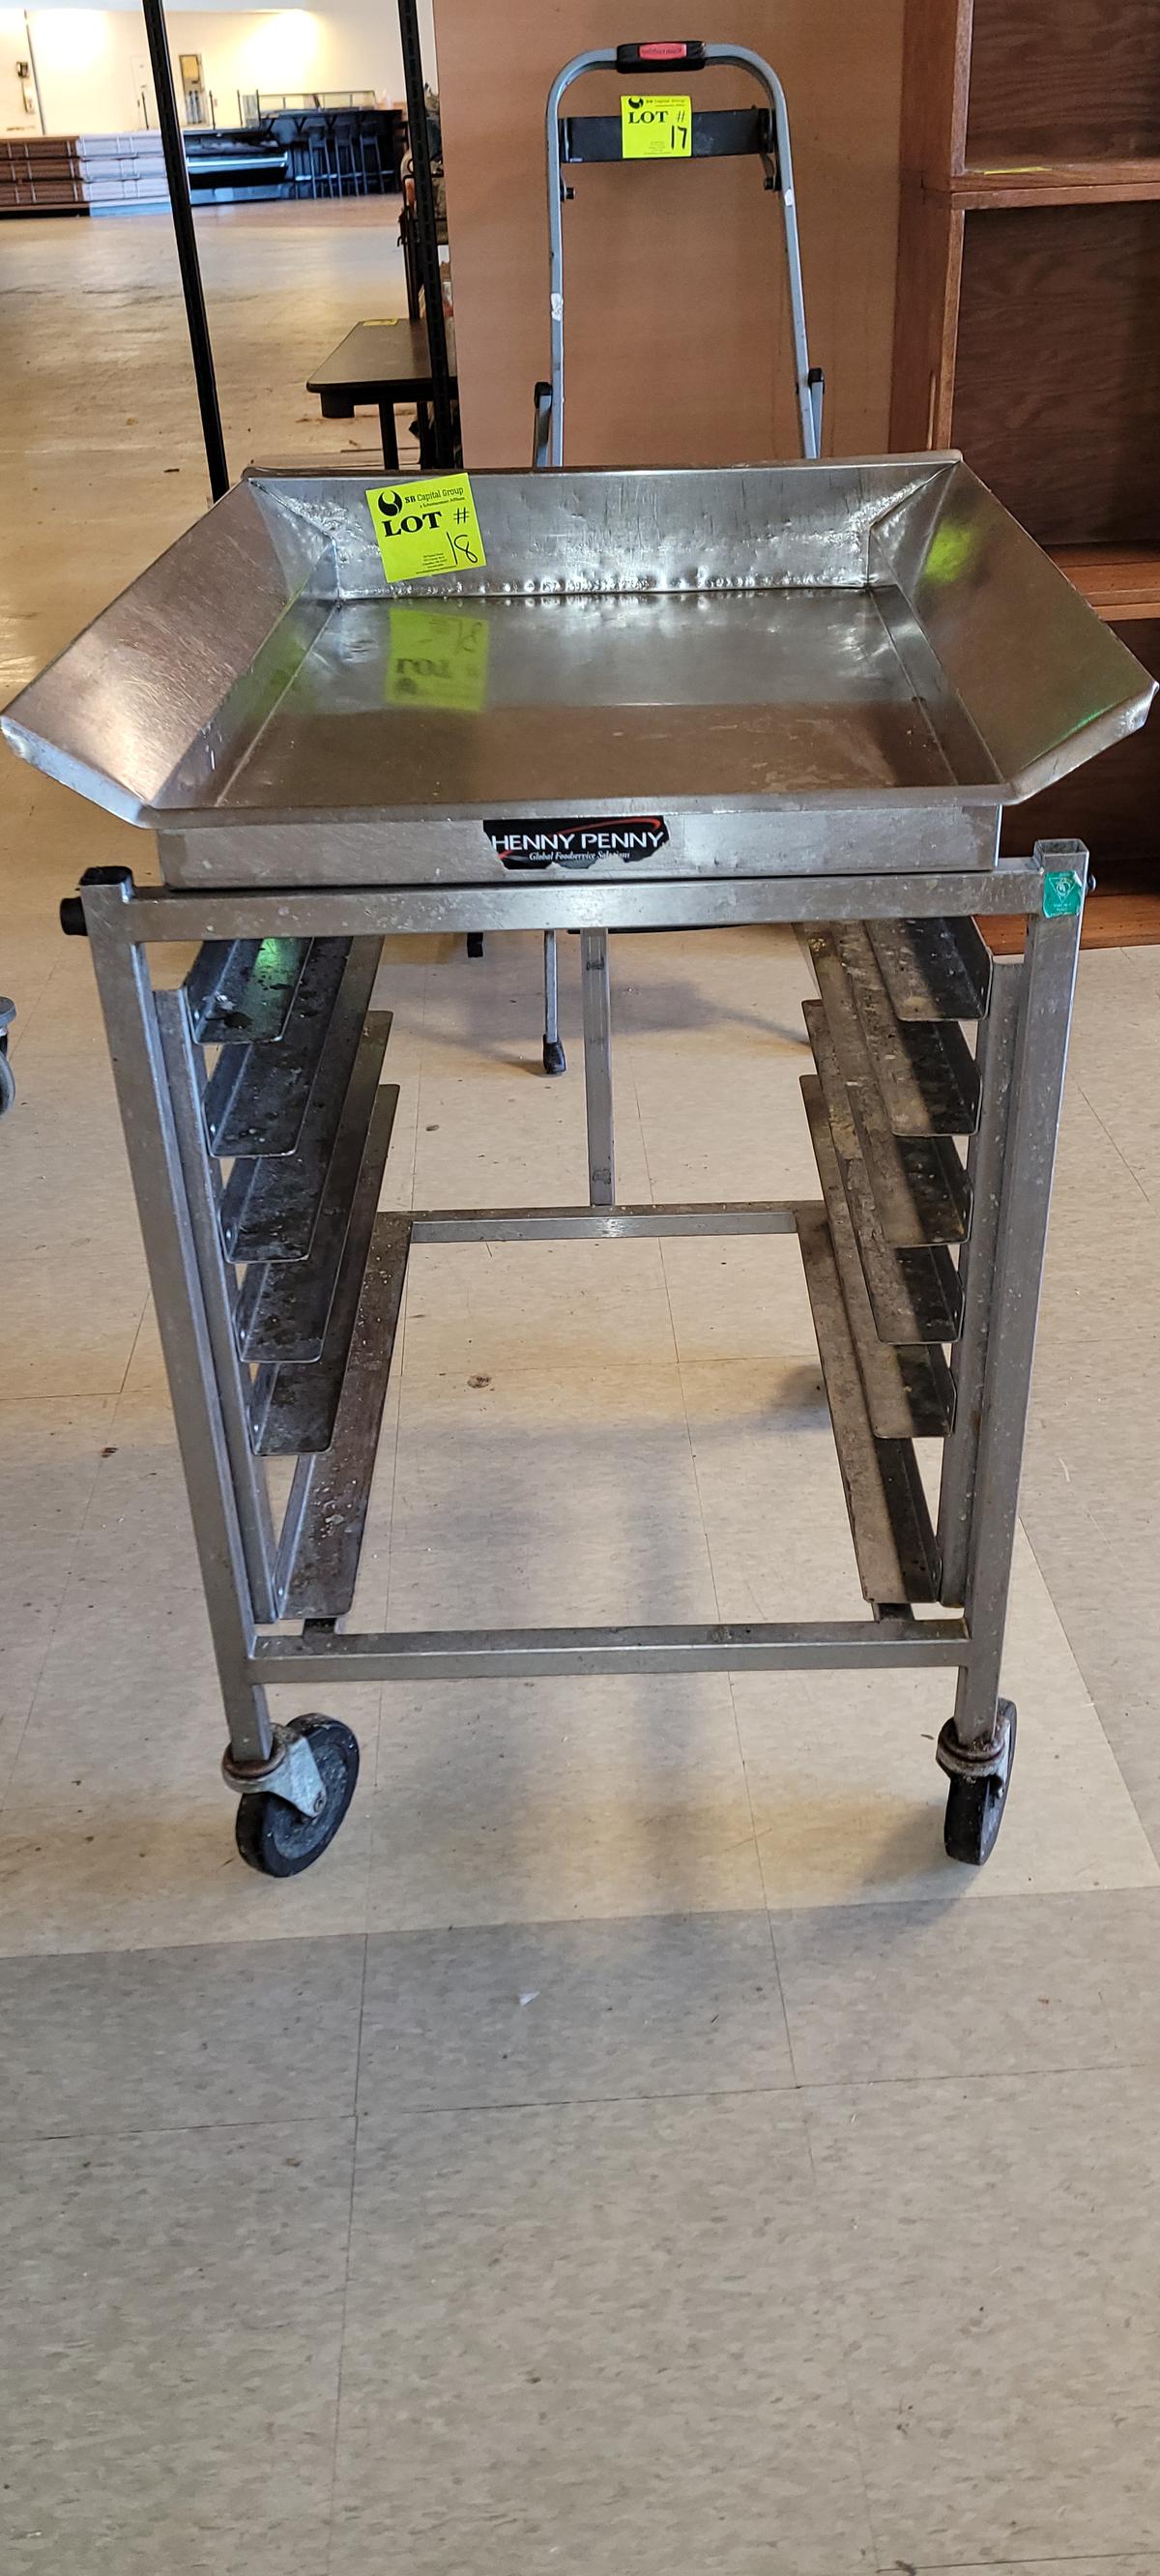 TABLE BREADING STAINLESS HOLDS 6 TRAYS REMOVABLE TOP